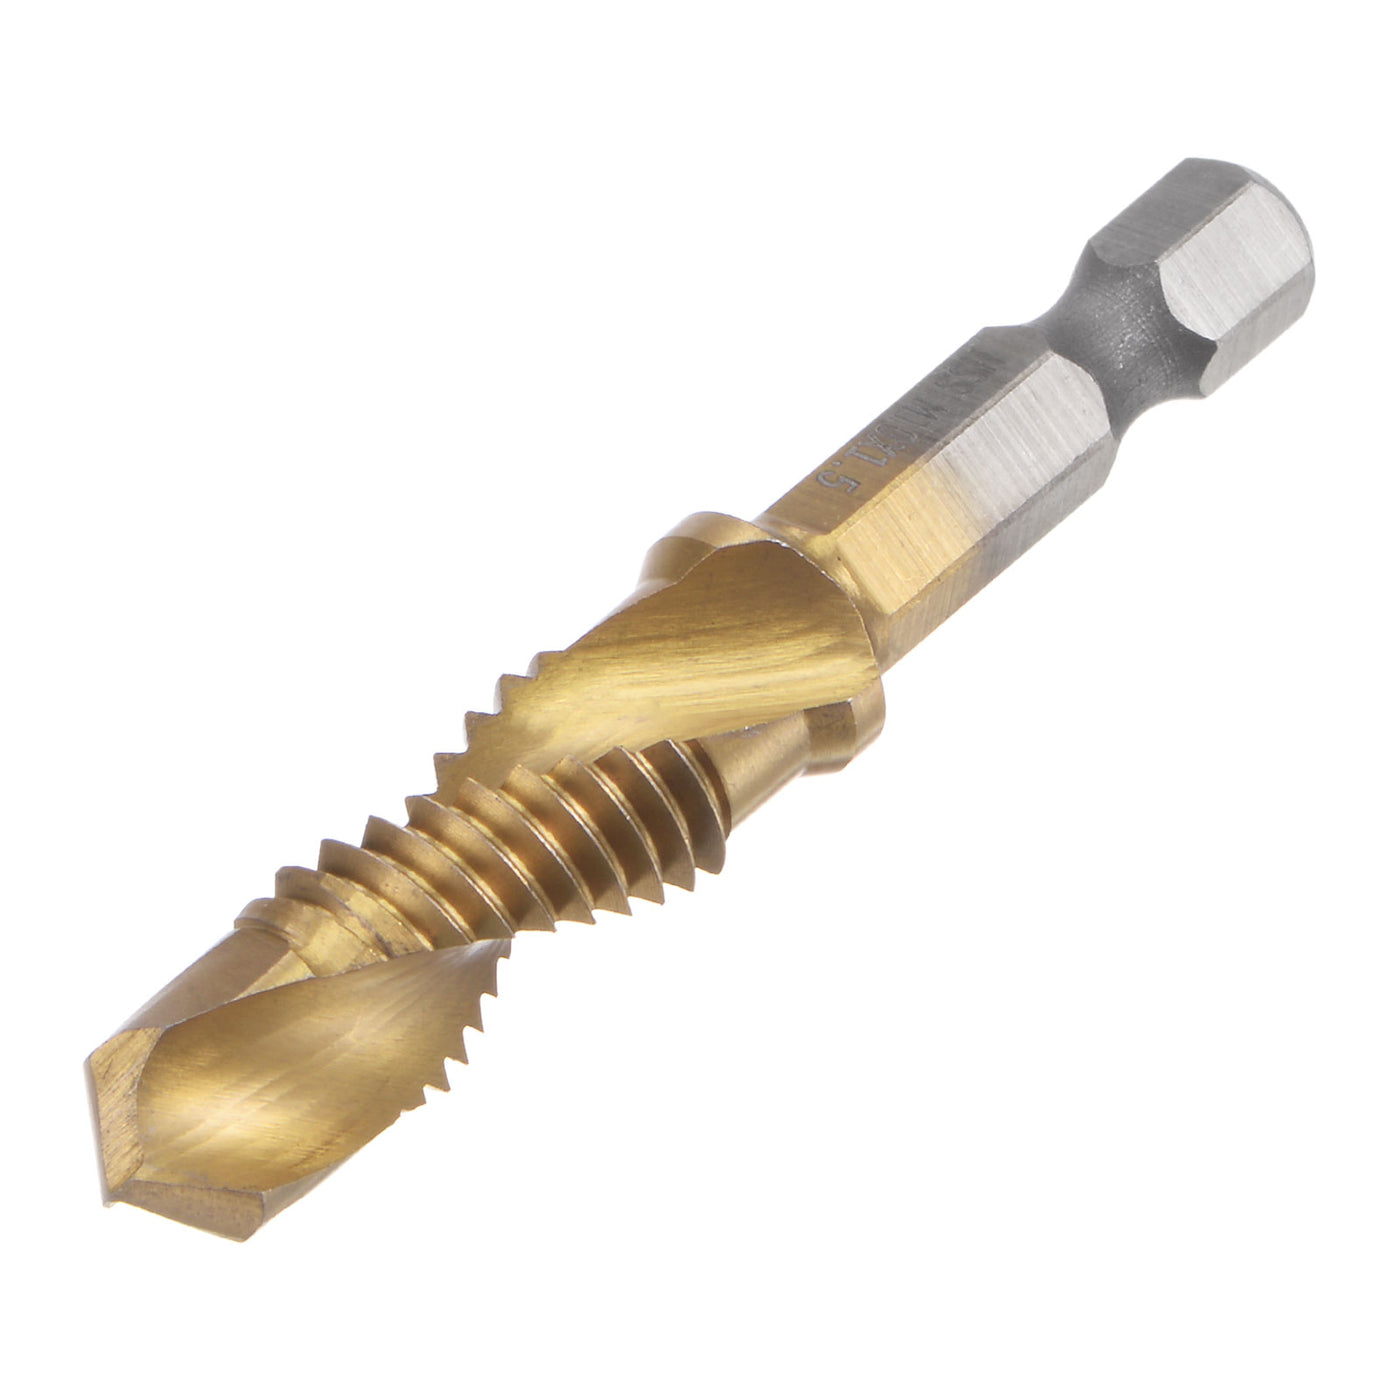 Uxcell Uxcell M10 x 1.5 Titanium Coated High Speed Steel 4341 Combination Drill Tap Bit